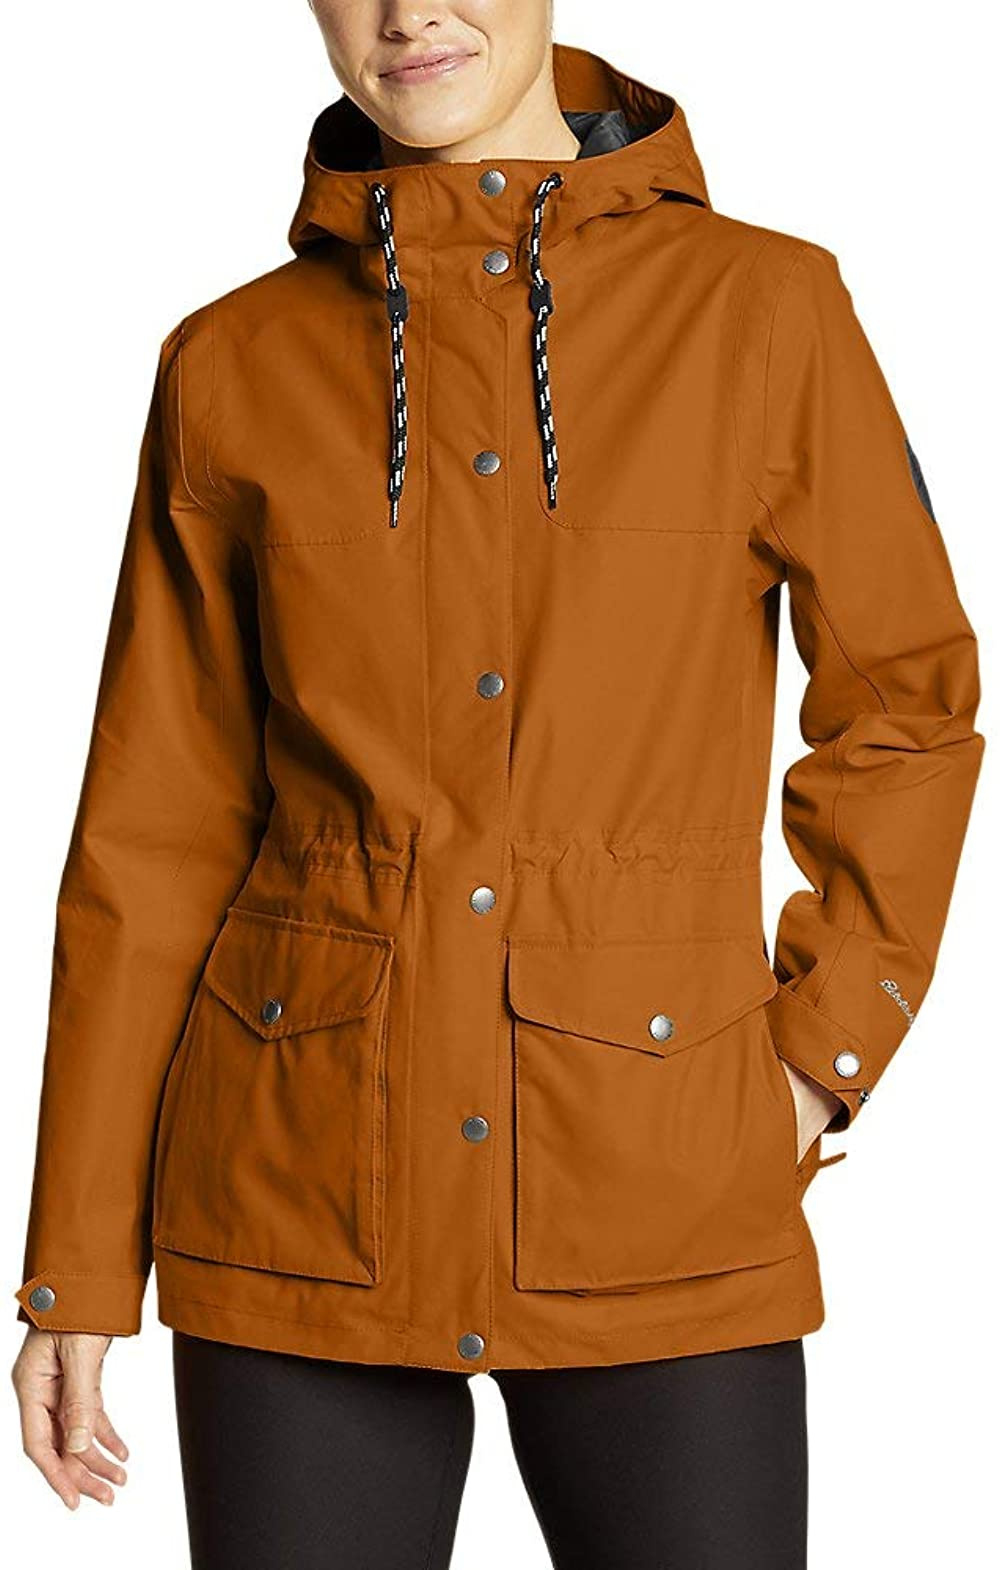 Best waterproof jackets and salopettes for offshore sailors